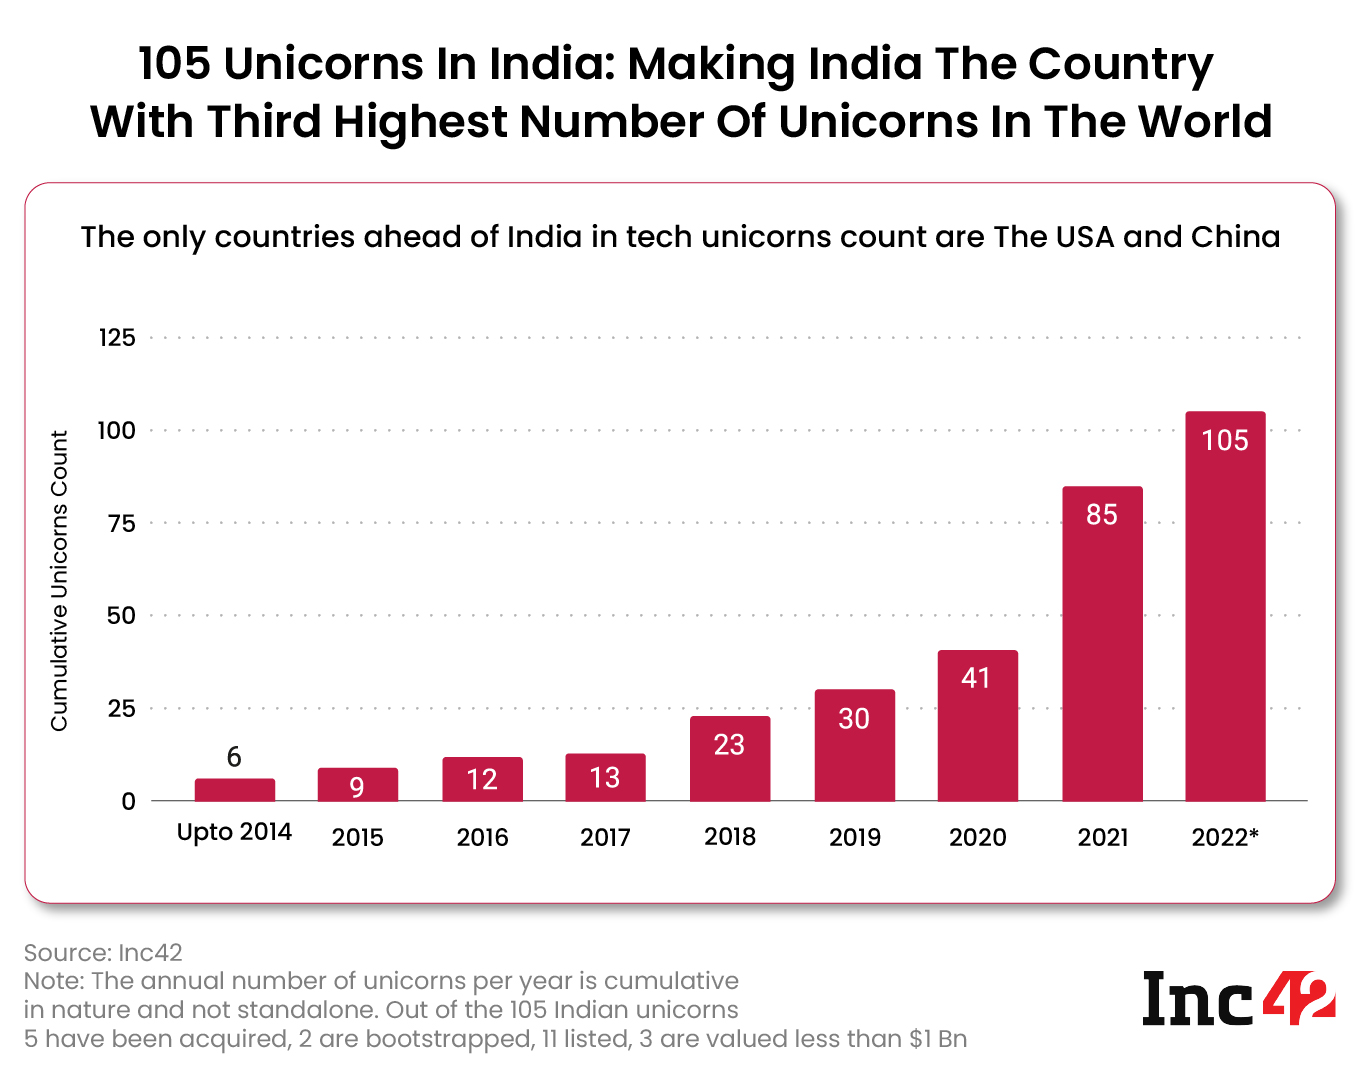 India has the third-most unicorns in the world after the US and China